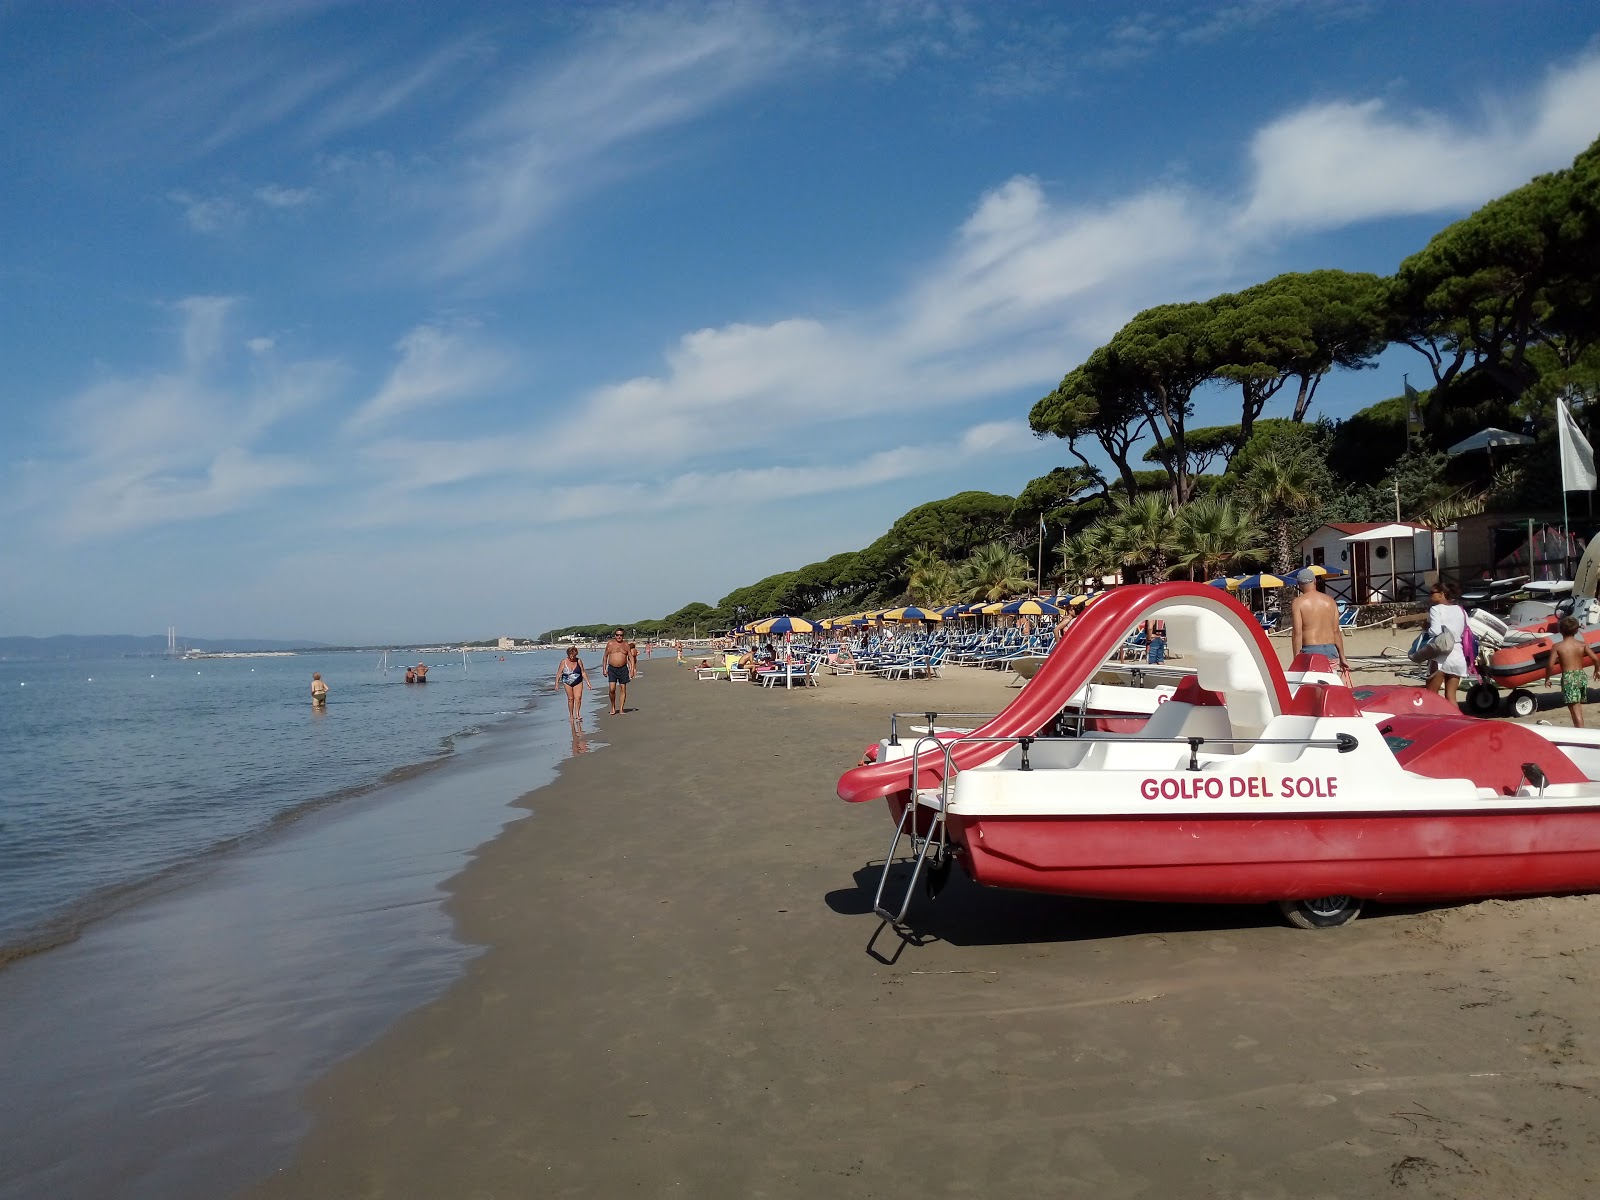 Photo of Spiaggia Golfo del Sole with long straight shore